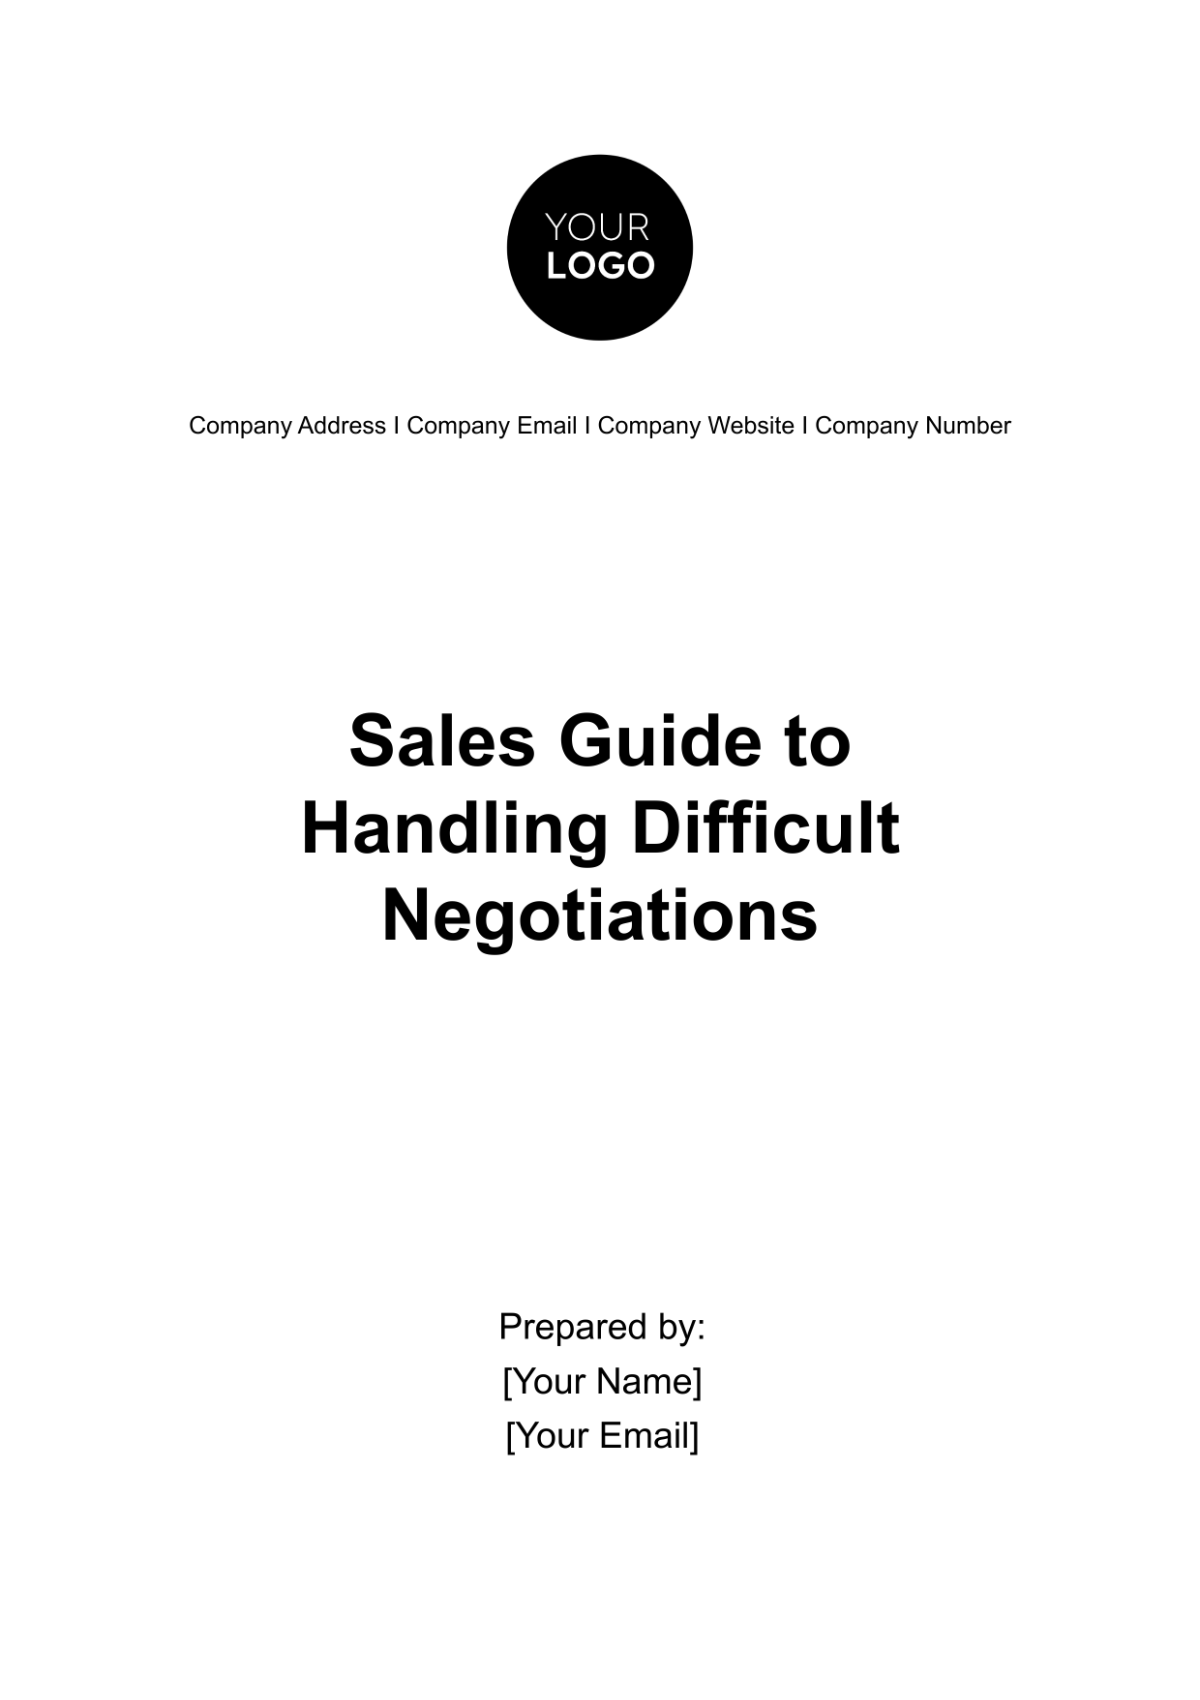 Sales Guide to Handling Difficult Negotiations Template